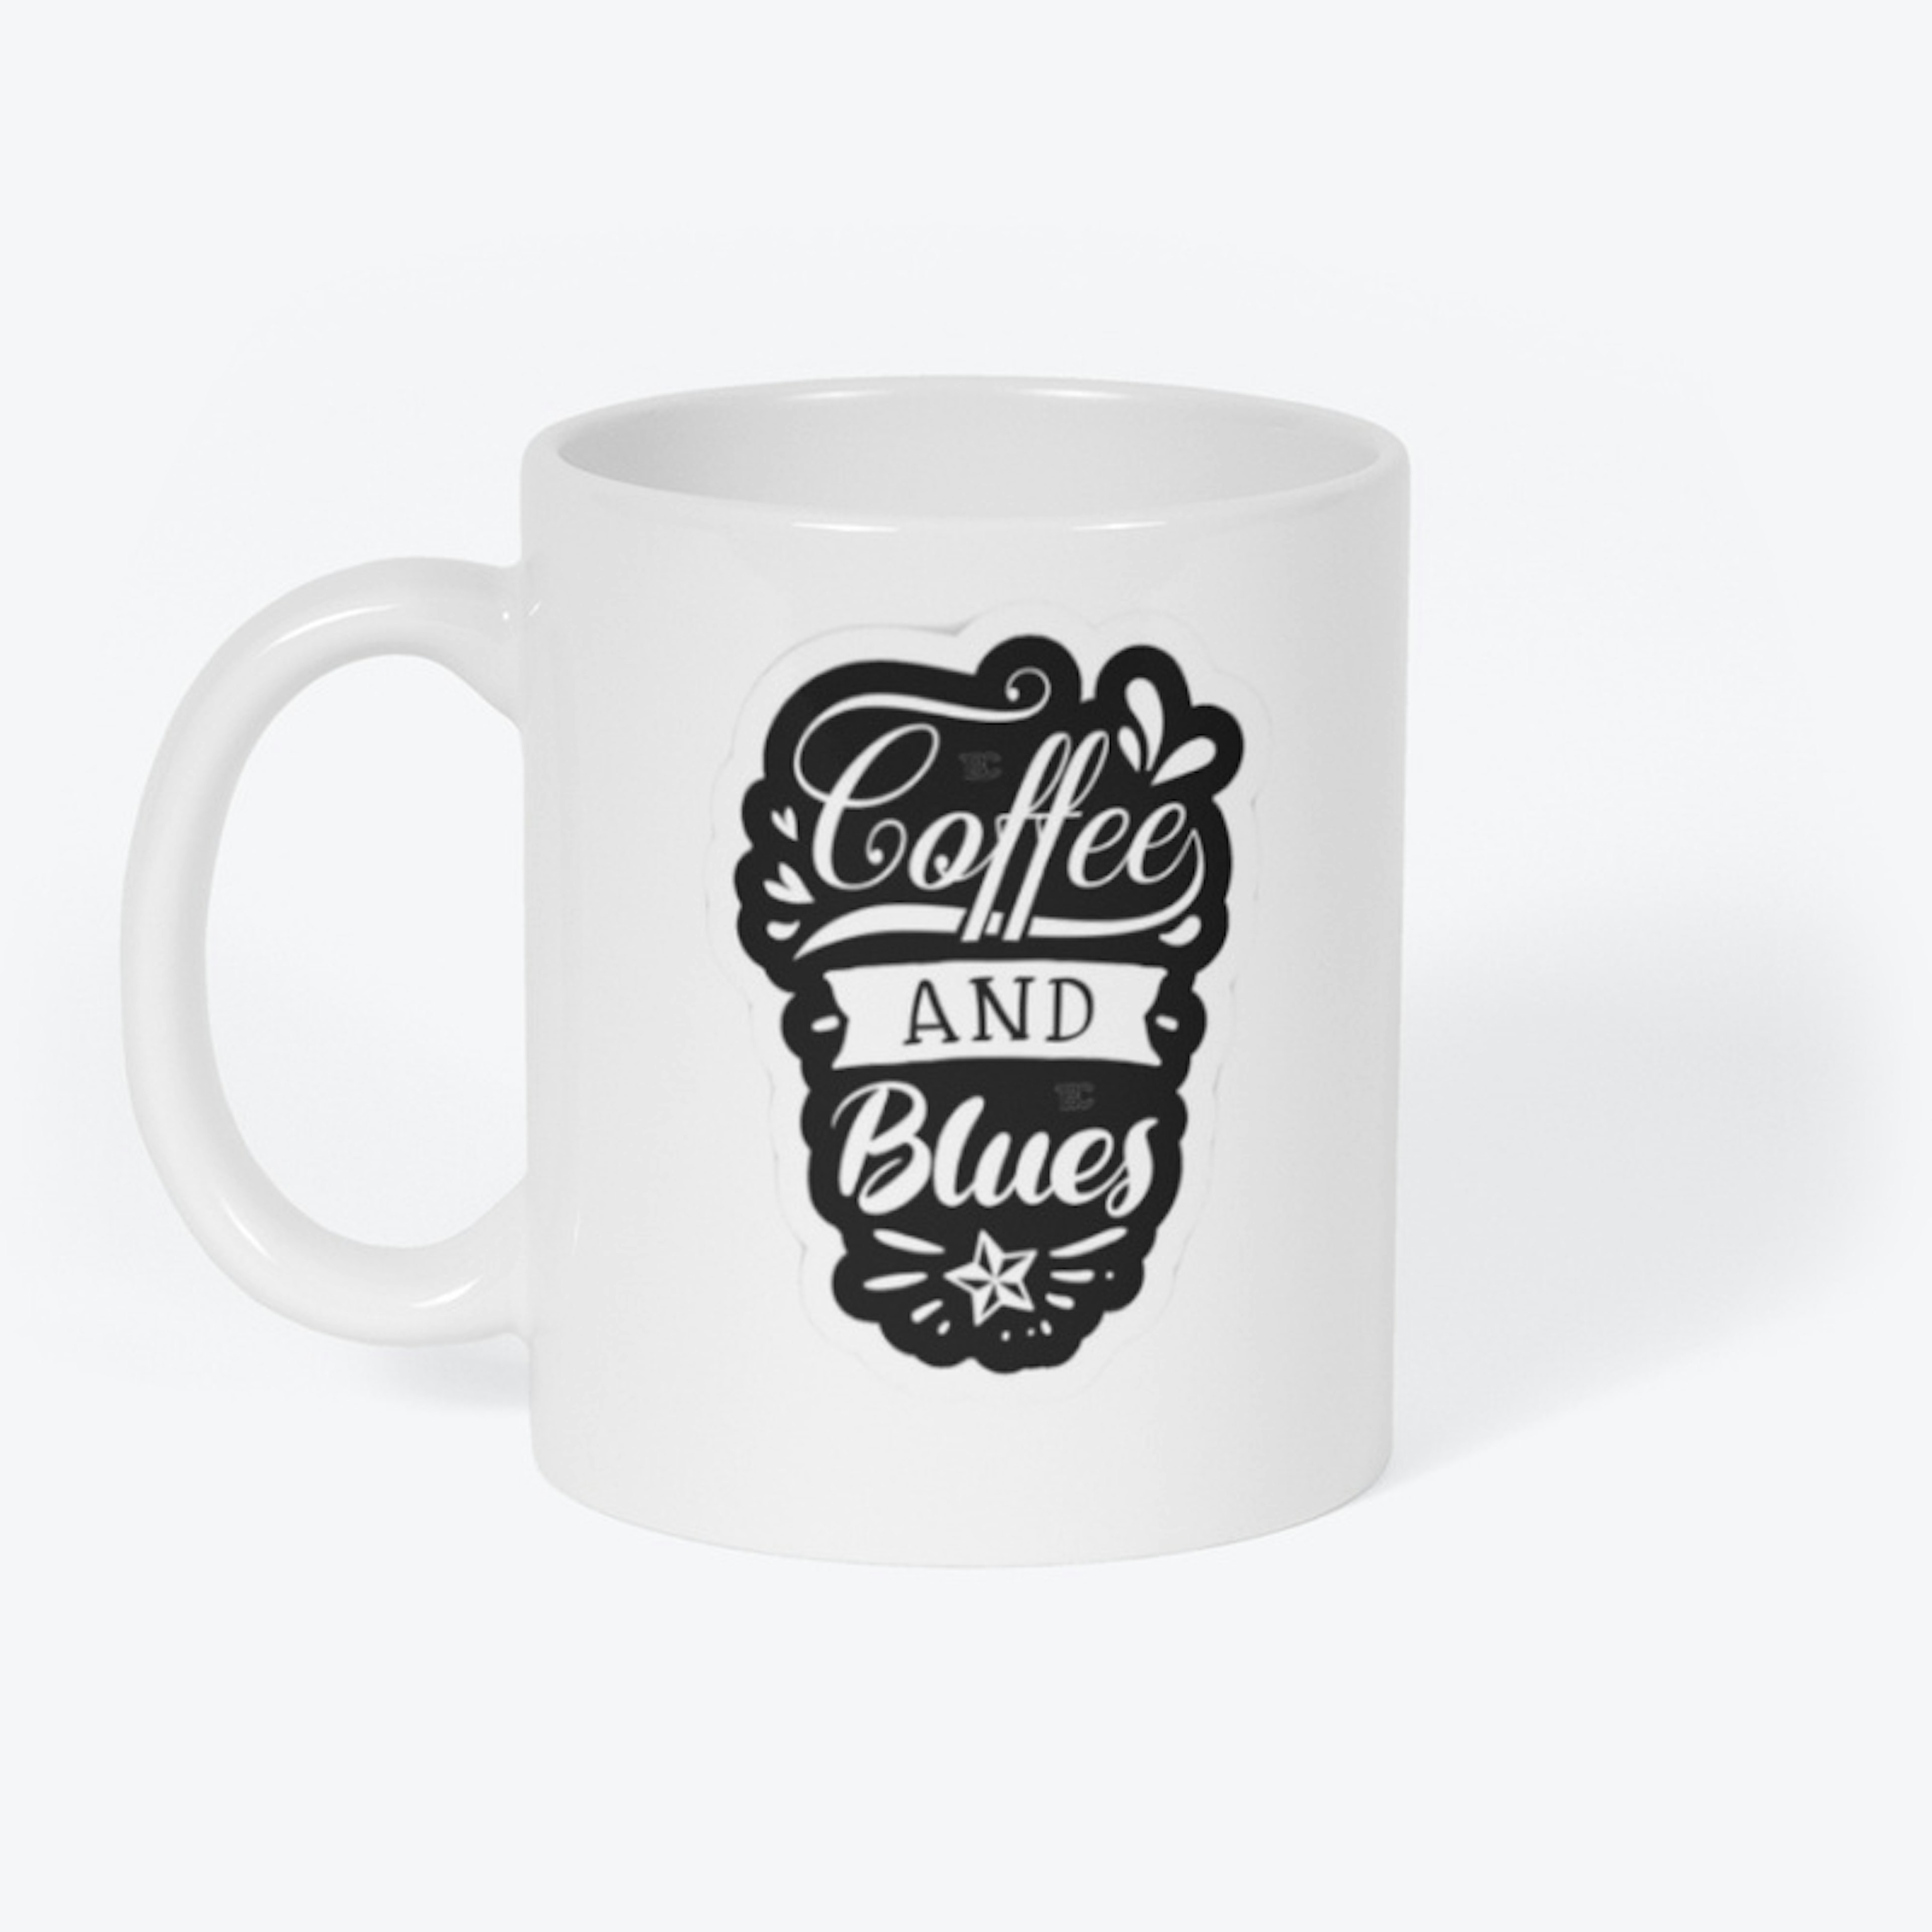 Coffe and blues